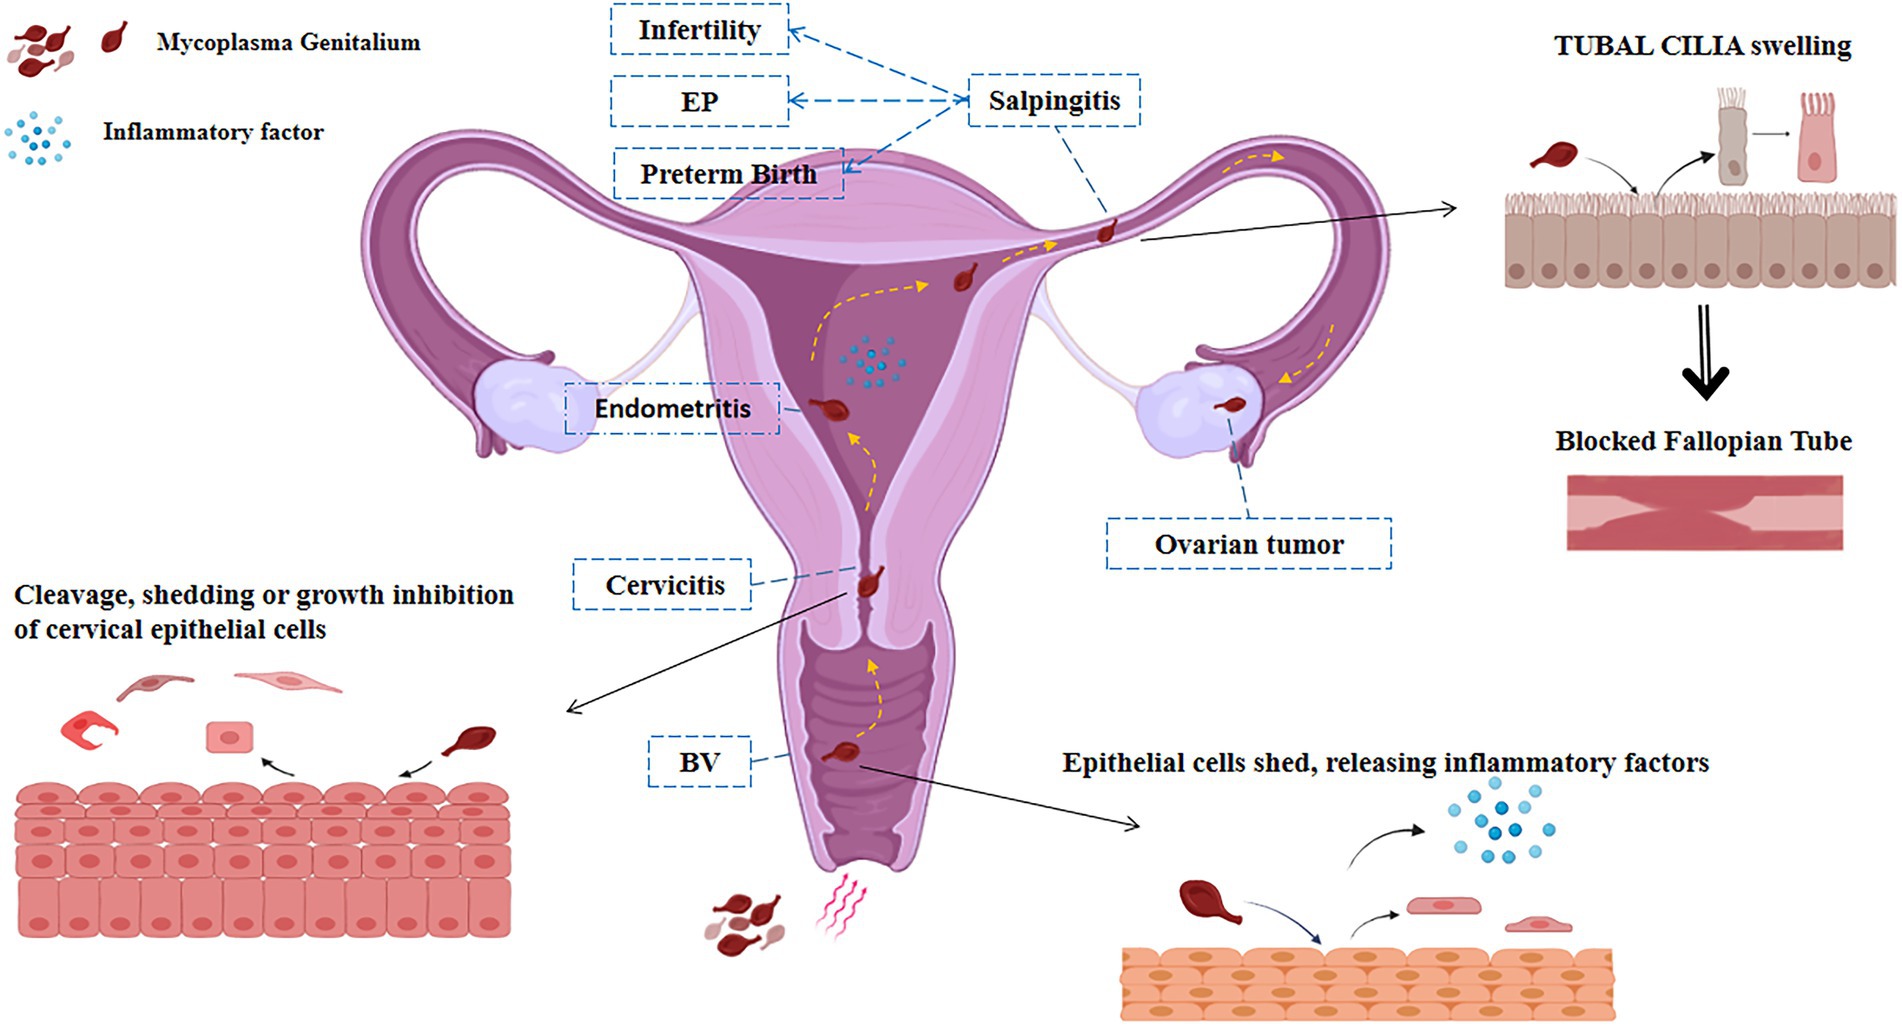 Frontiers Mycoplasma genitalium infection in the female reproductive system Diseases and treatment